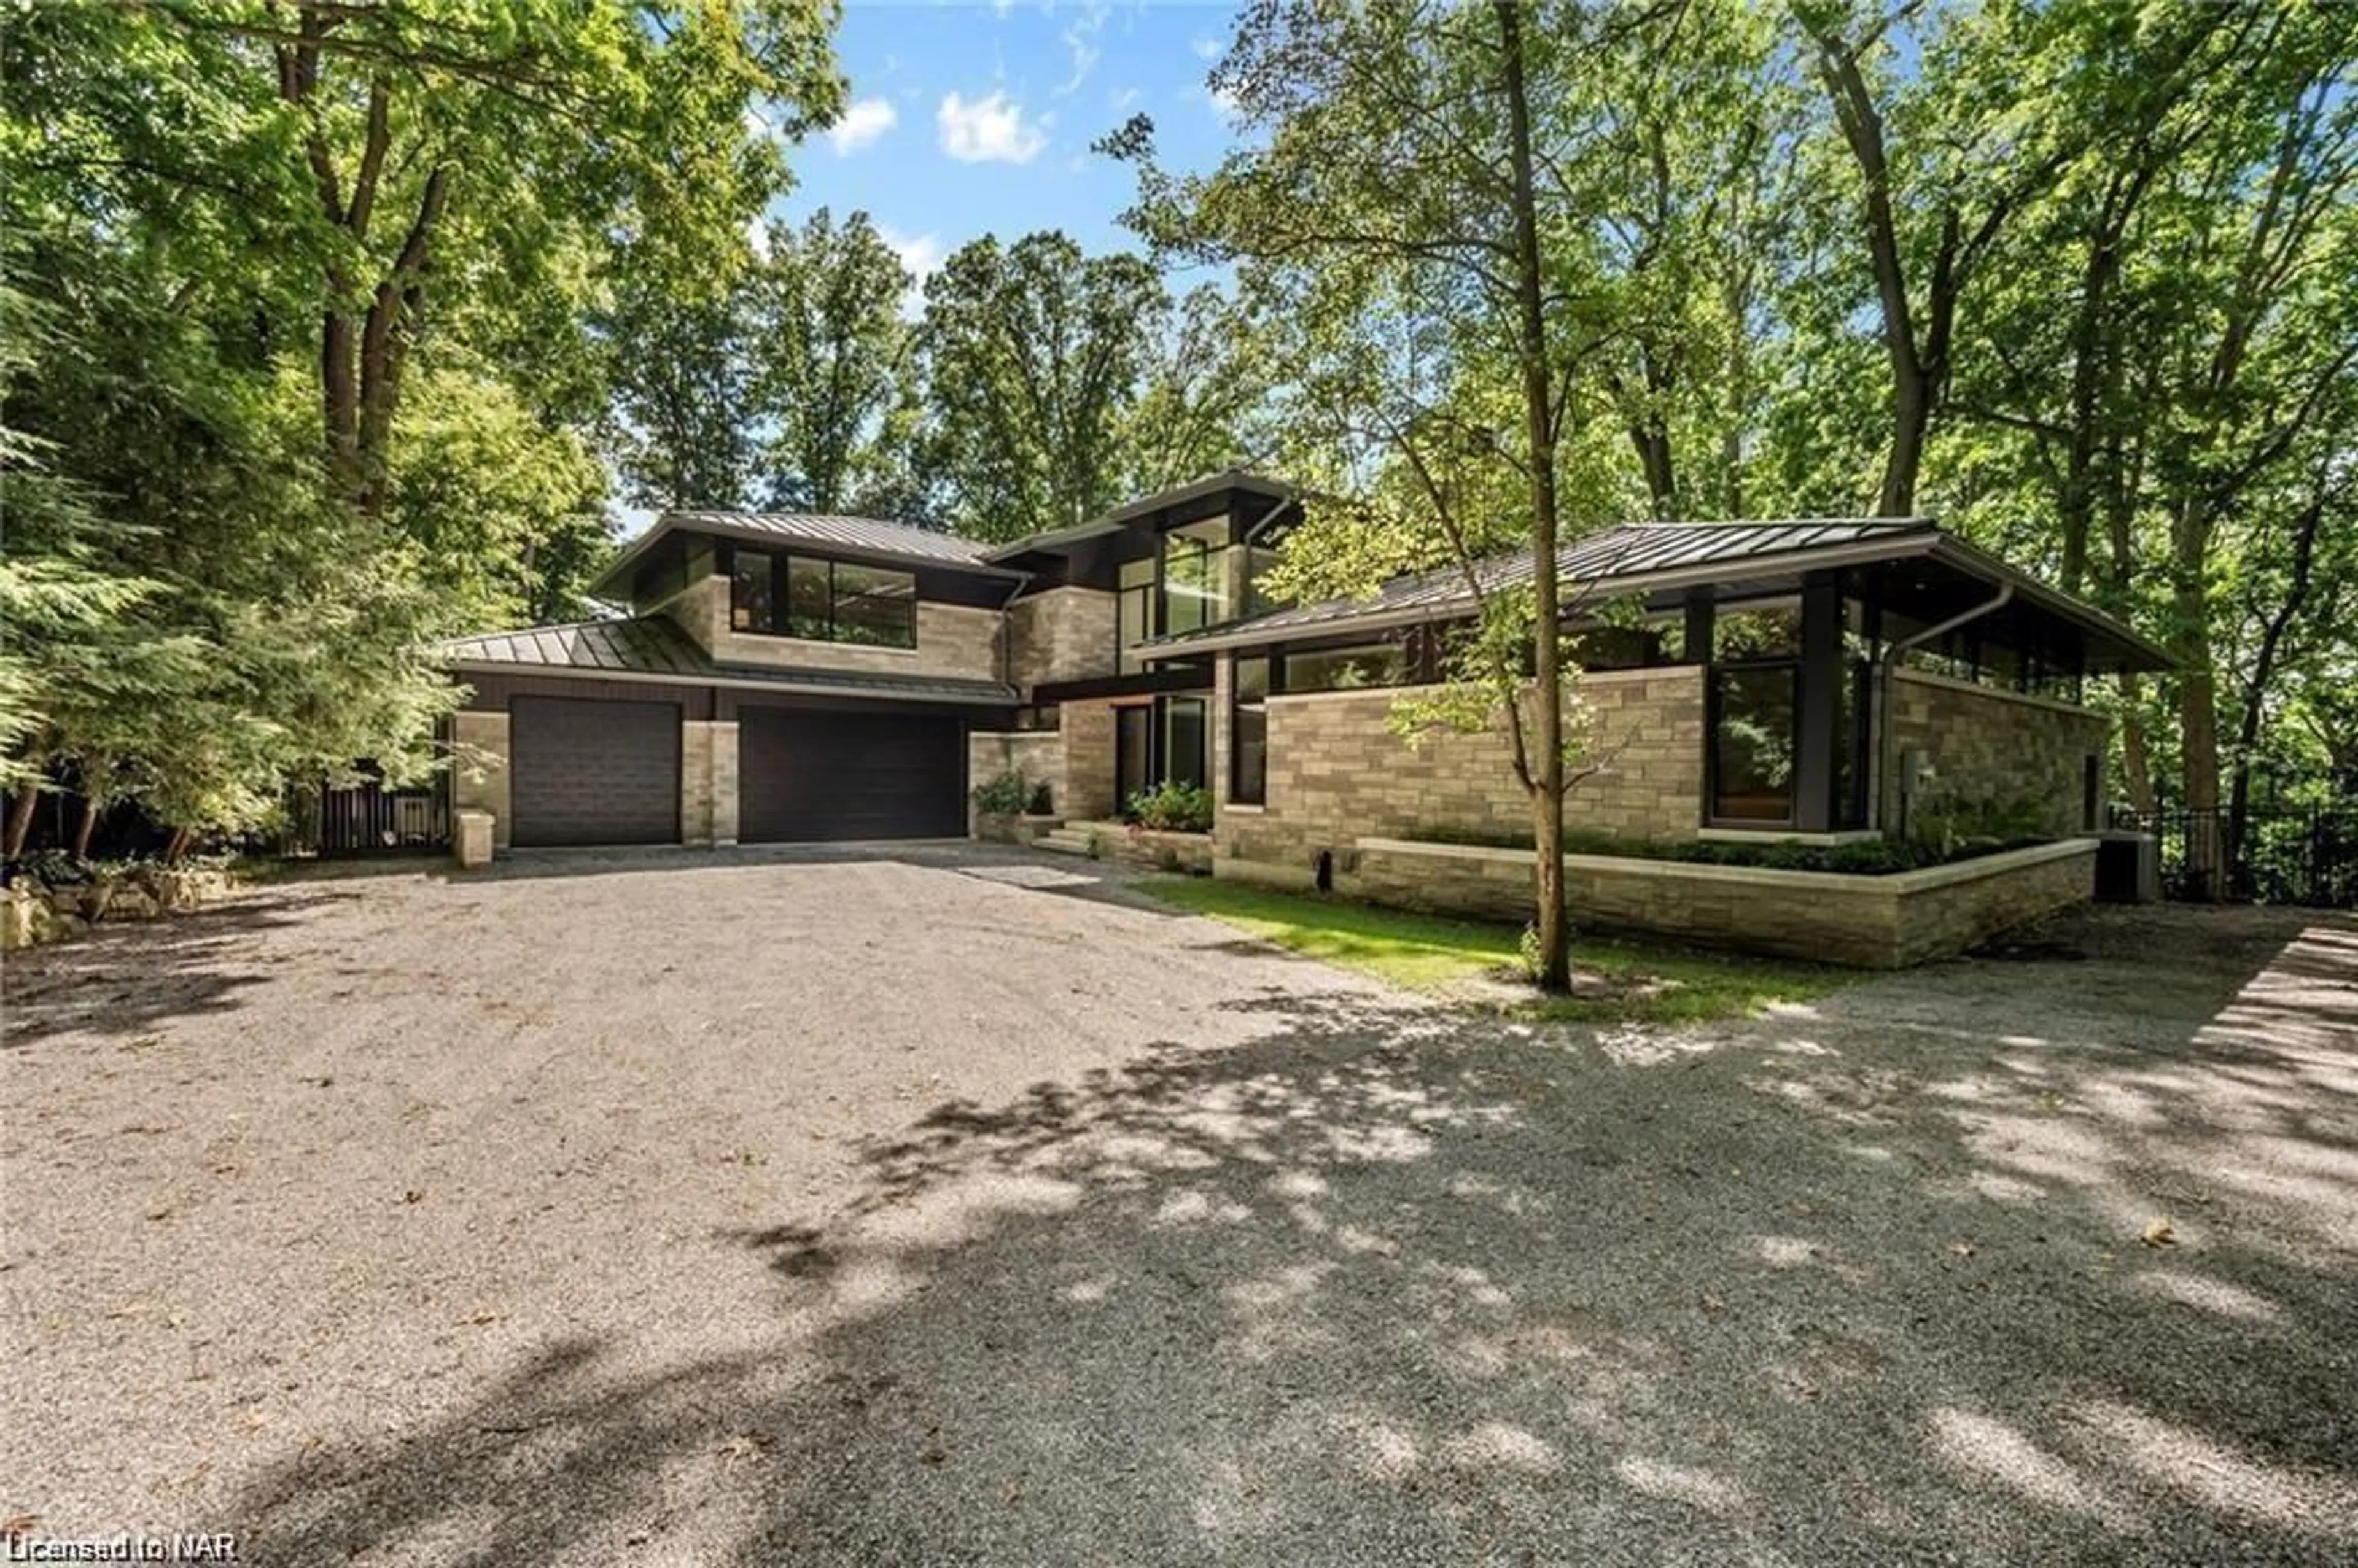 Home with brick exterior material for 22 Melrose Dr, Niagara-on-the-Lake Ontario L0S 1J0